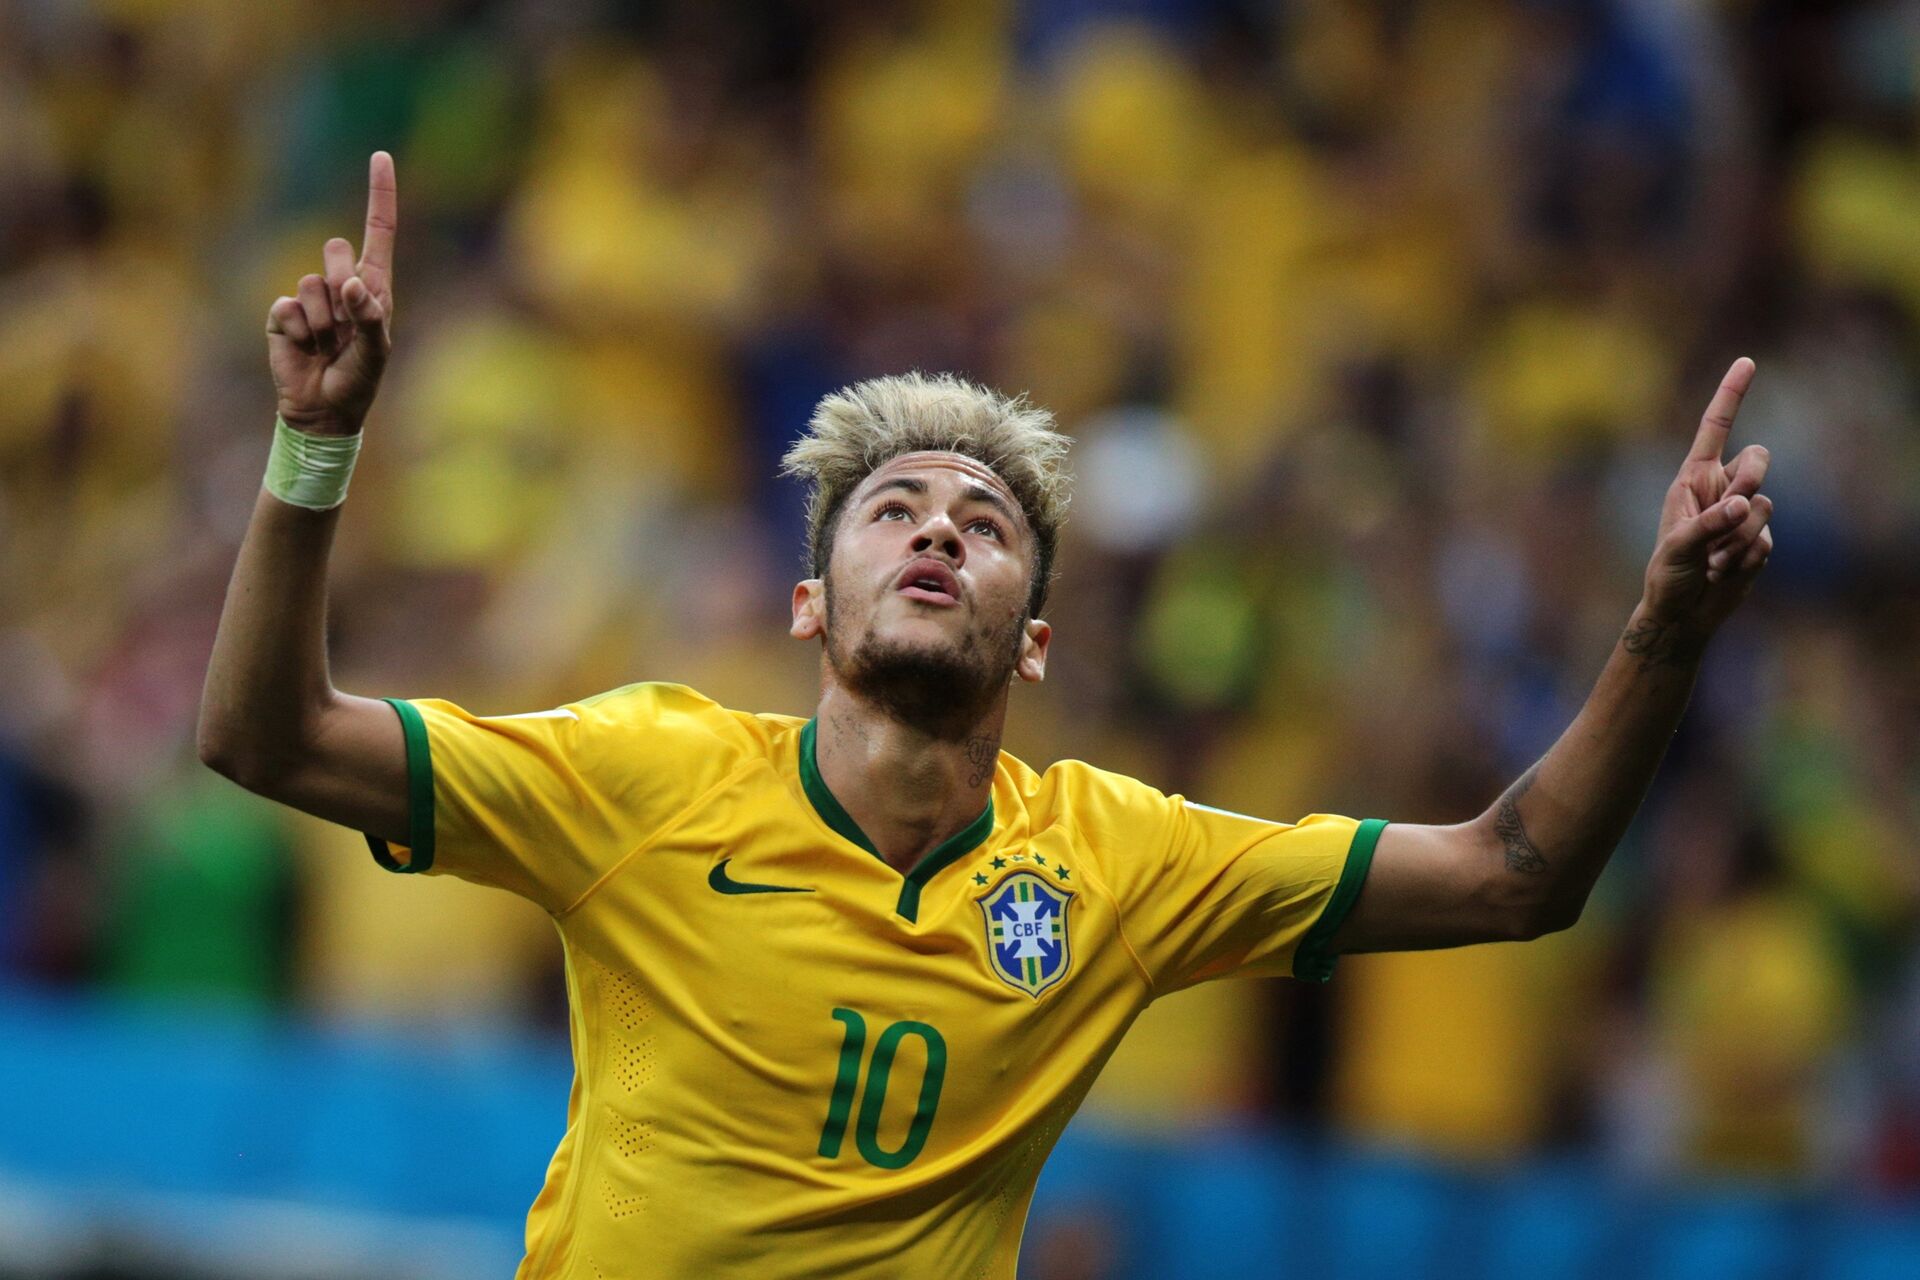 Just Don't Do It? Nike Terminates Contract With Neymar Amid Sexual Assault Allegations - Sputnik International, 1920, 28.05.2021